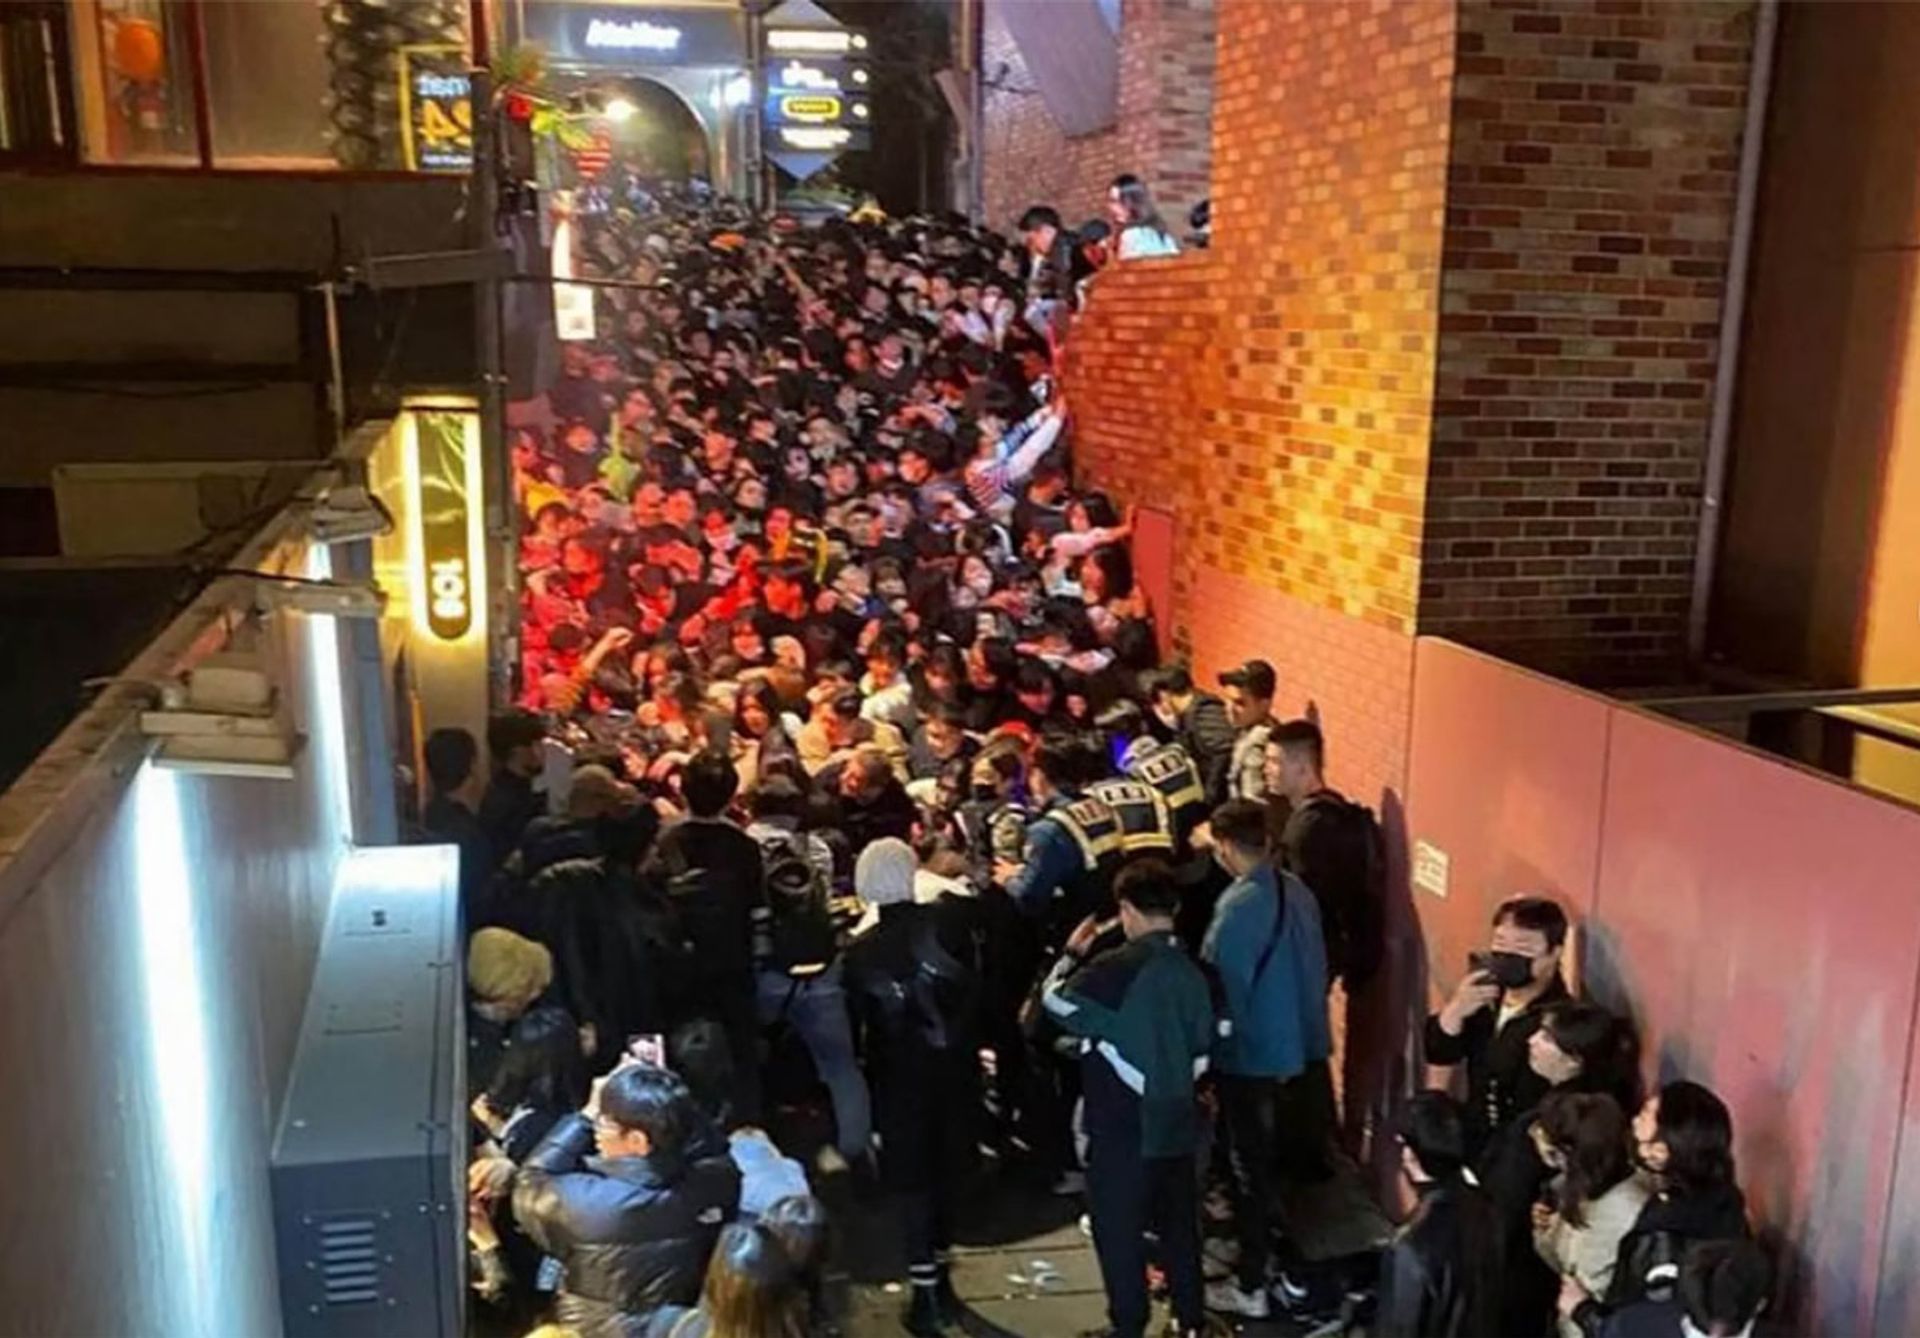 Hundreds of Halloween partygoers were stuck on the night of Oct 29, 2022, in this 40m-long, 4m-wide alleyway when surging crowds caused some to fall and triggered a domino effect. This photo is provided by a Singaporean who got caught but managed to make it out safely with some cuts. PHOTO: KOH MING EN